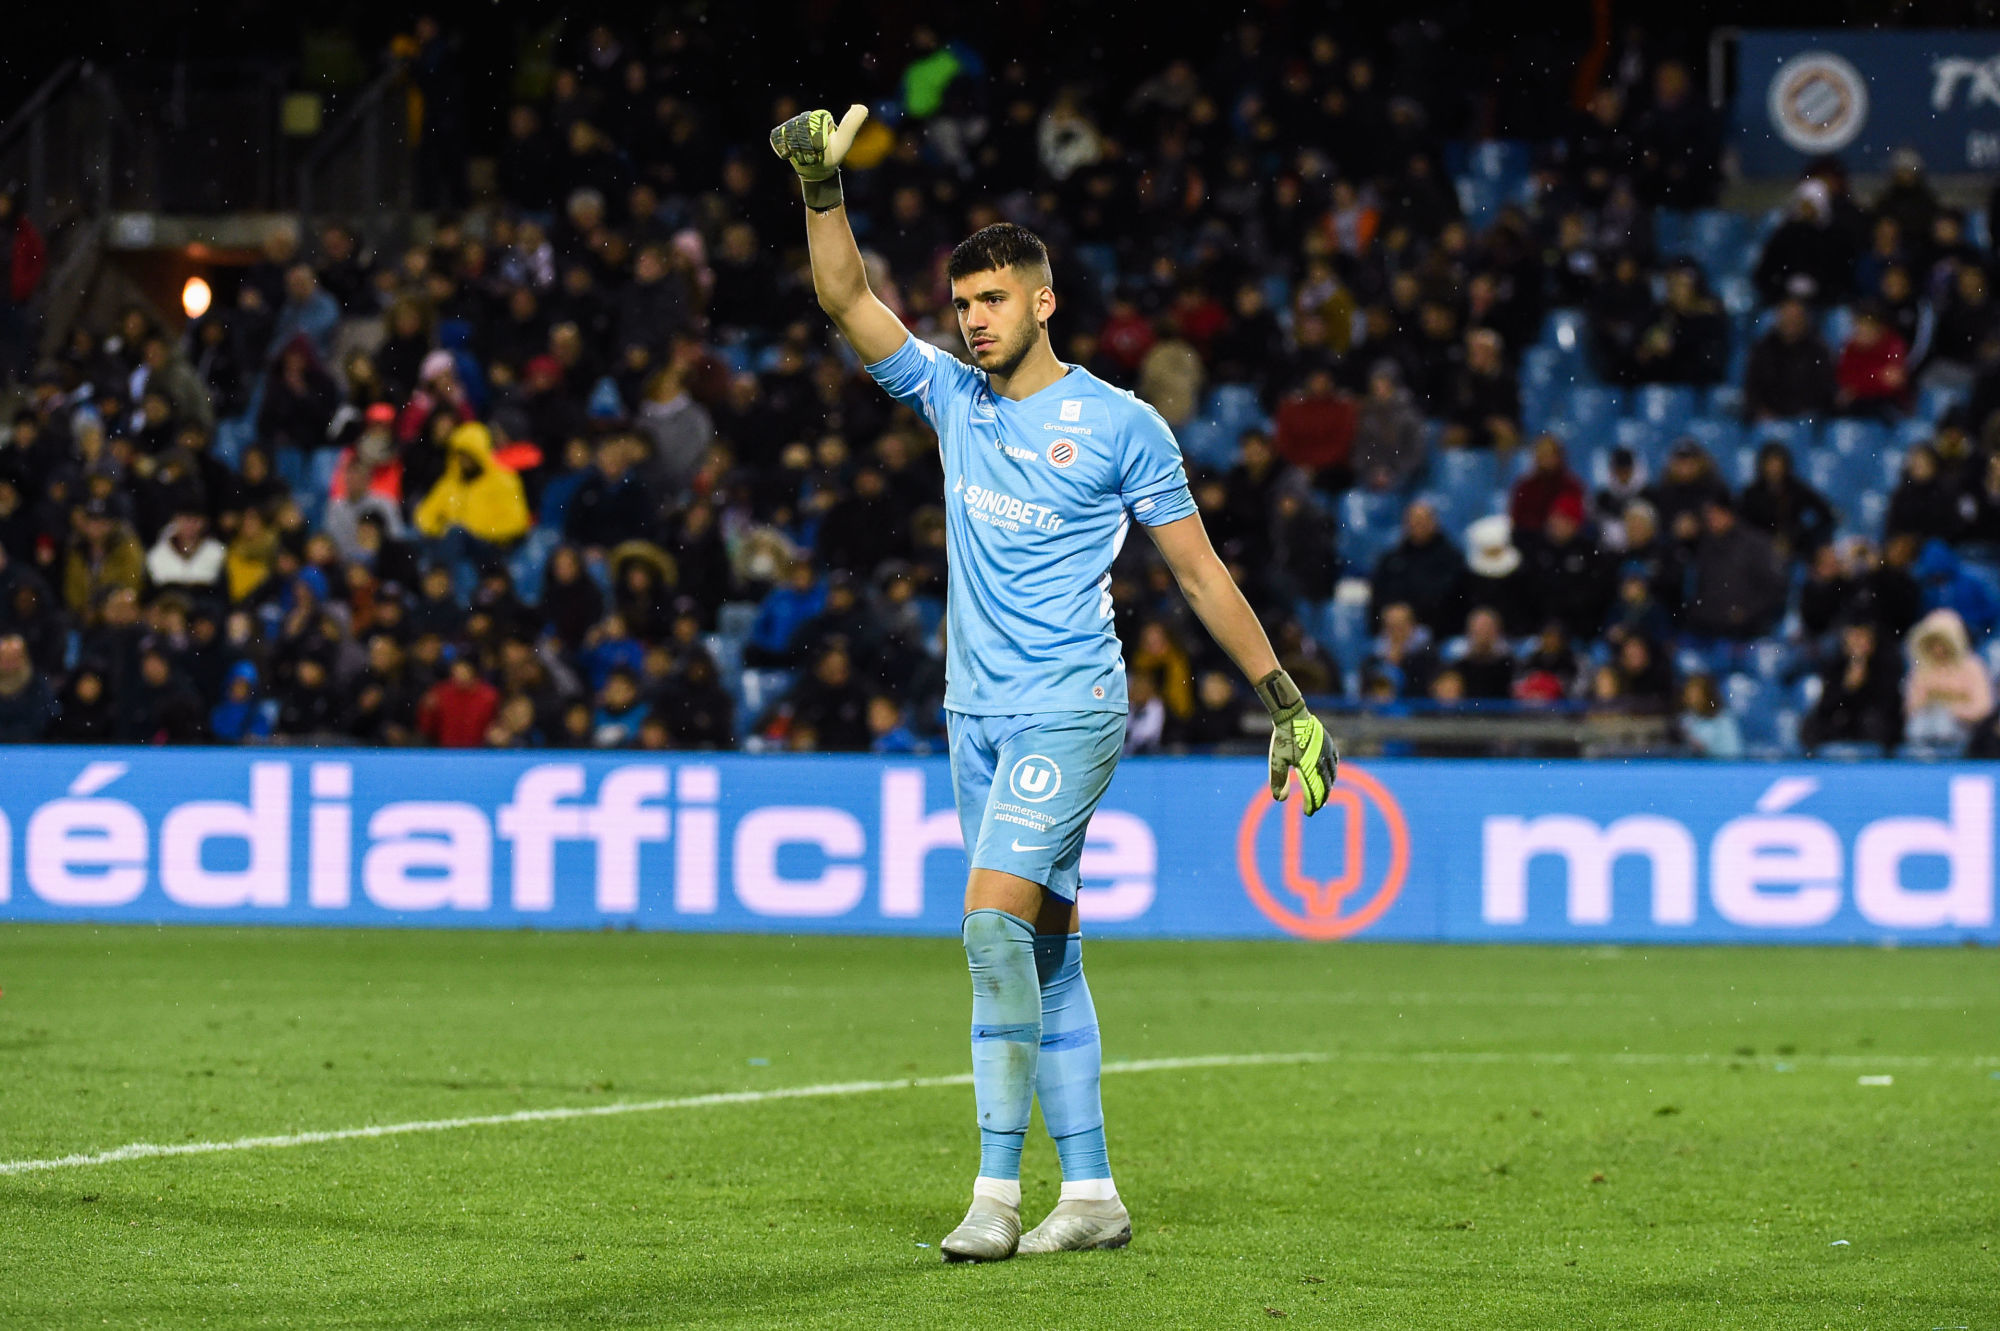 Geronimo RULLI of Montpellier   during the Ligue 1 match between Montpellier HSC and RC Strasbourg at Stade de la Mosson on February 29, 2020 in Montpellier, France. (Photo by Alexandre Dimou/Icon Sport) - Geronimo RULLI - Stade de la Mosson - Montpellier (France)